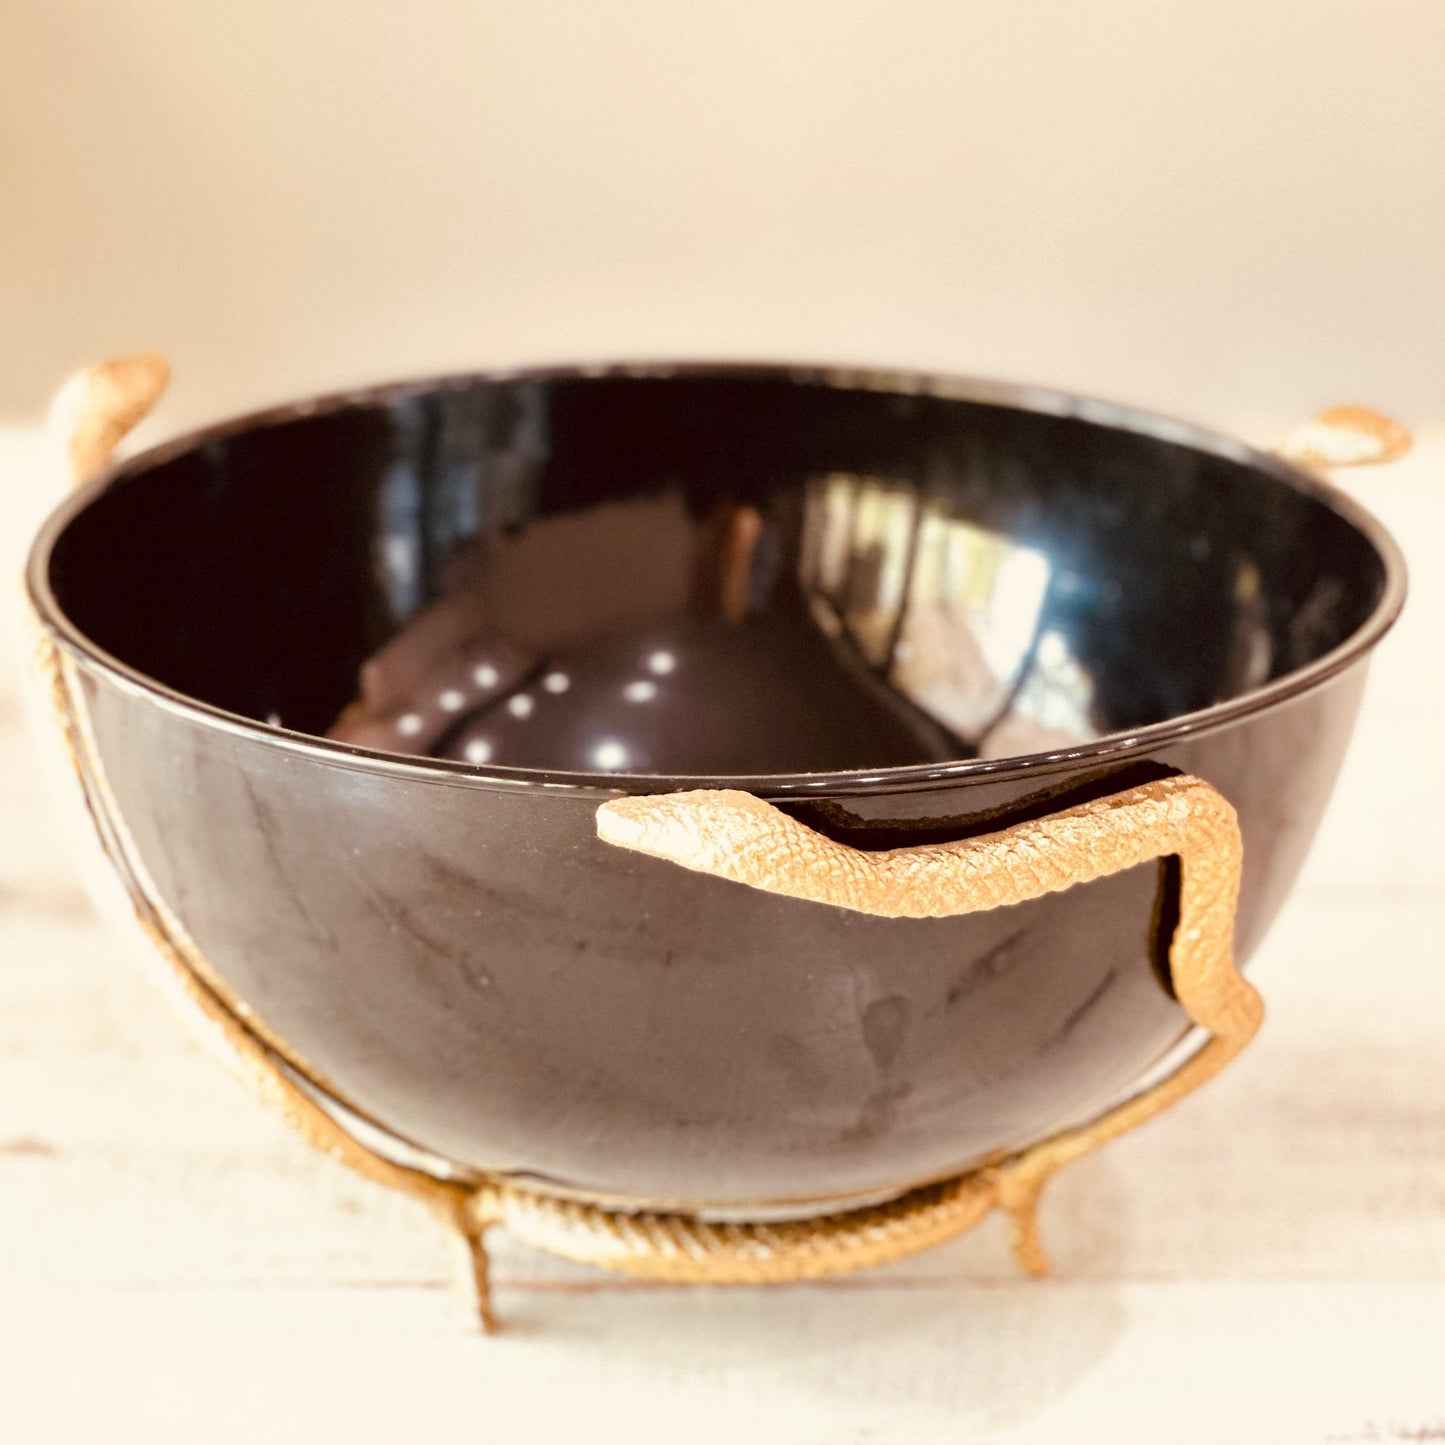 The Serpent Serving Bowl-Serving Bowl-tbgypsysoul